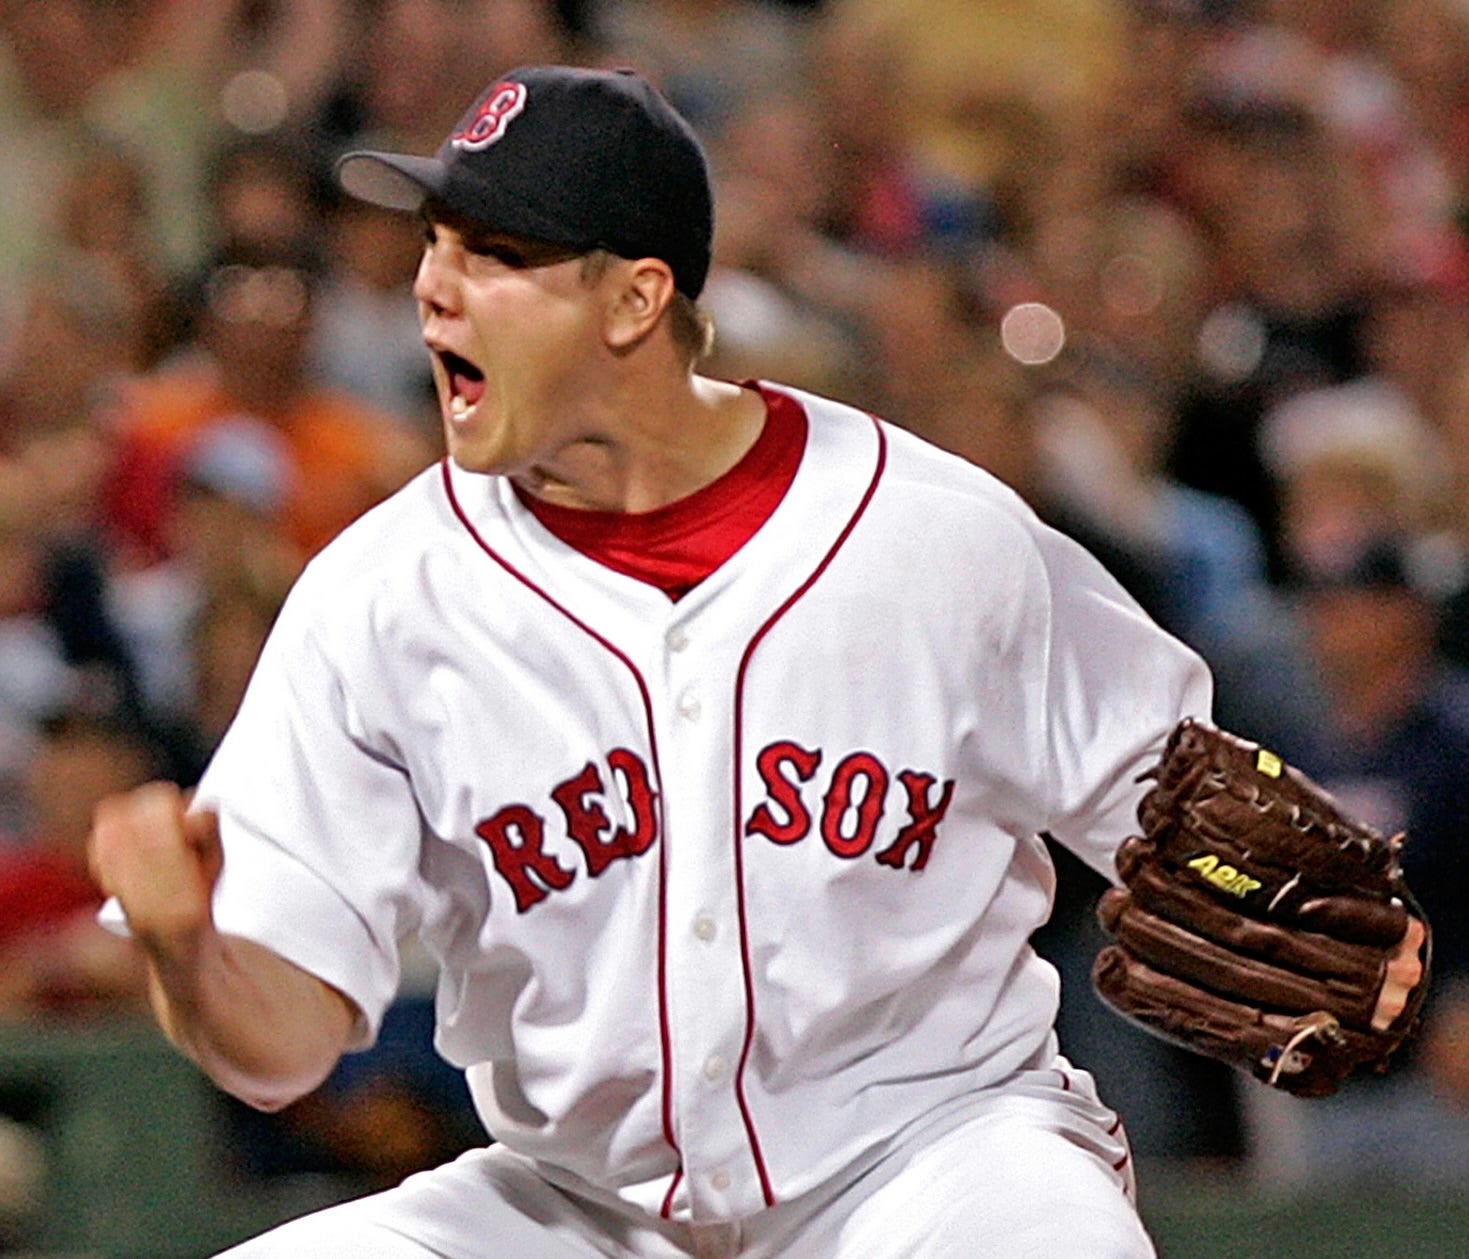 Red Sox closer Jonathan Papelbon celebrates after Michael Young struck out looking to end the game in June, 2007.